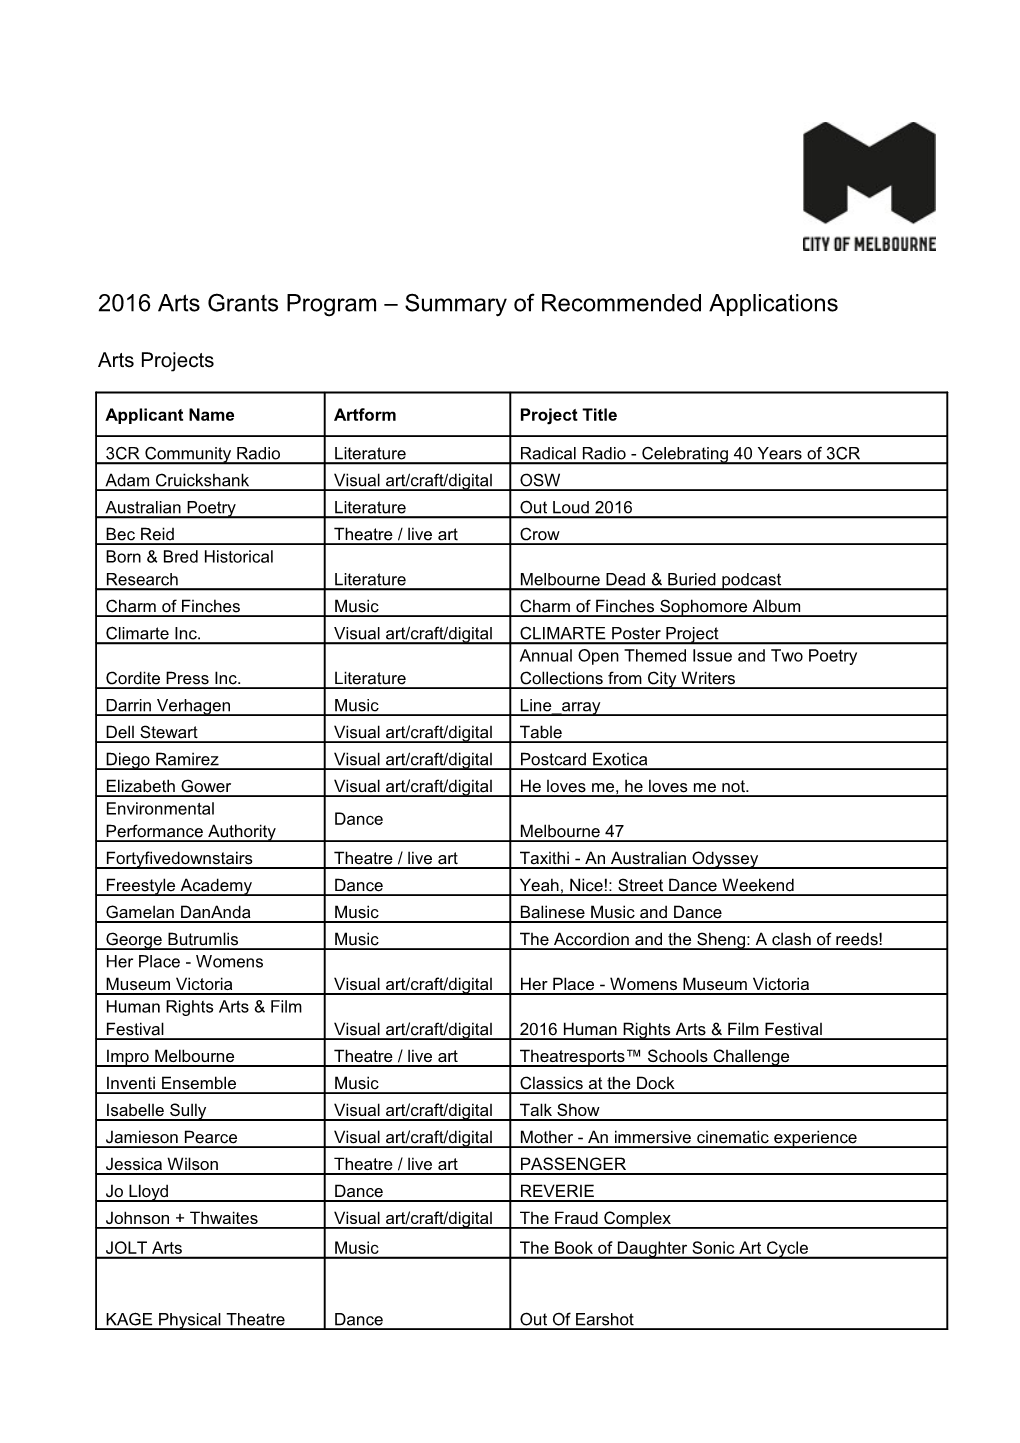 Arts Grants Program 2016 - Summary of Recommended Applications